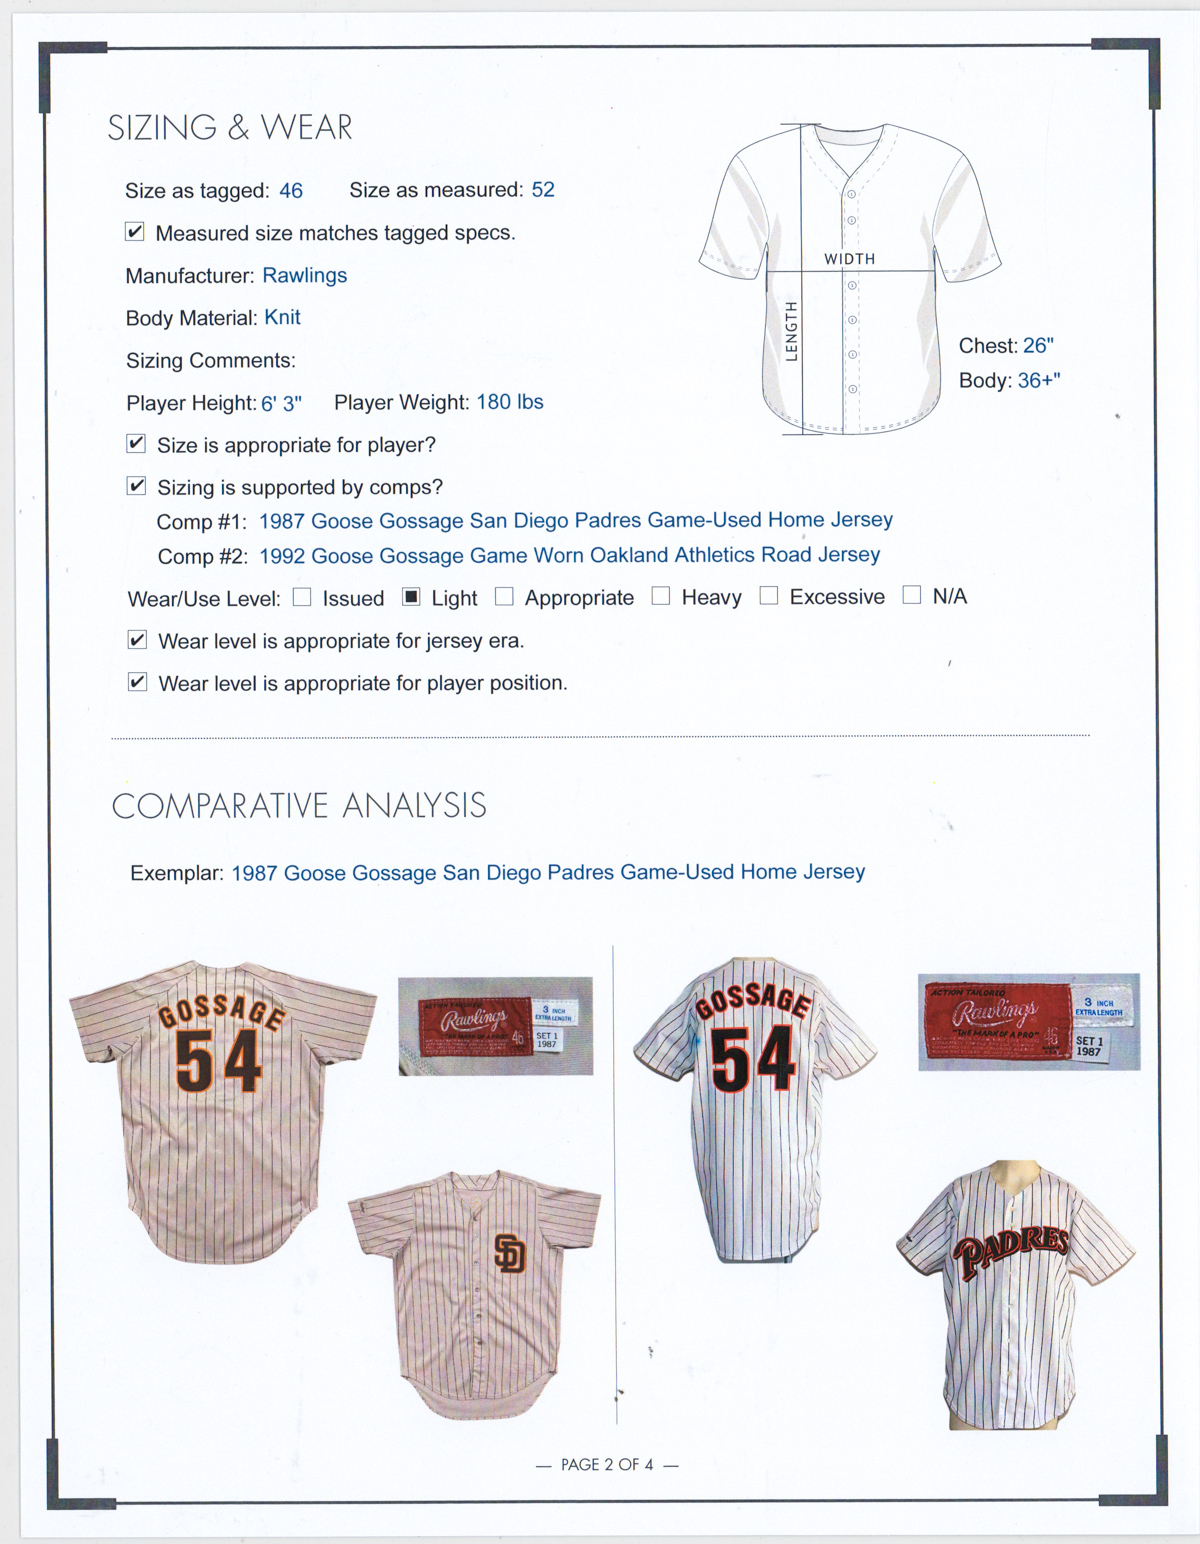 1987 Goose Gossage Padres Game Used Jersey